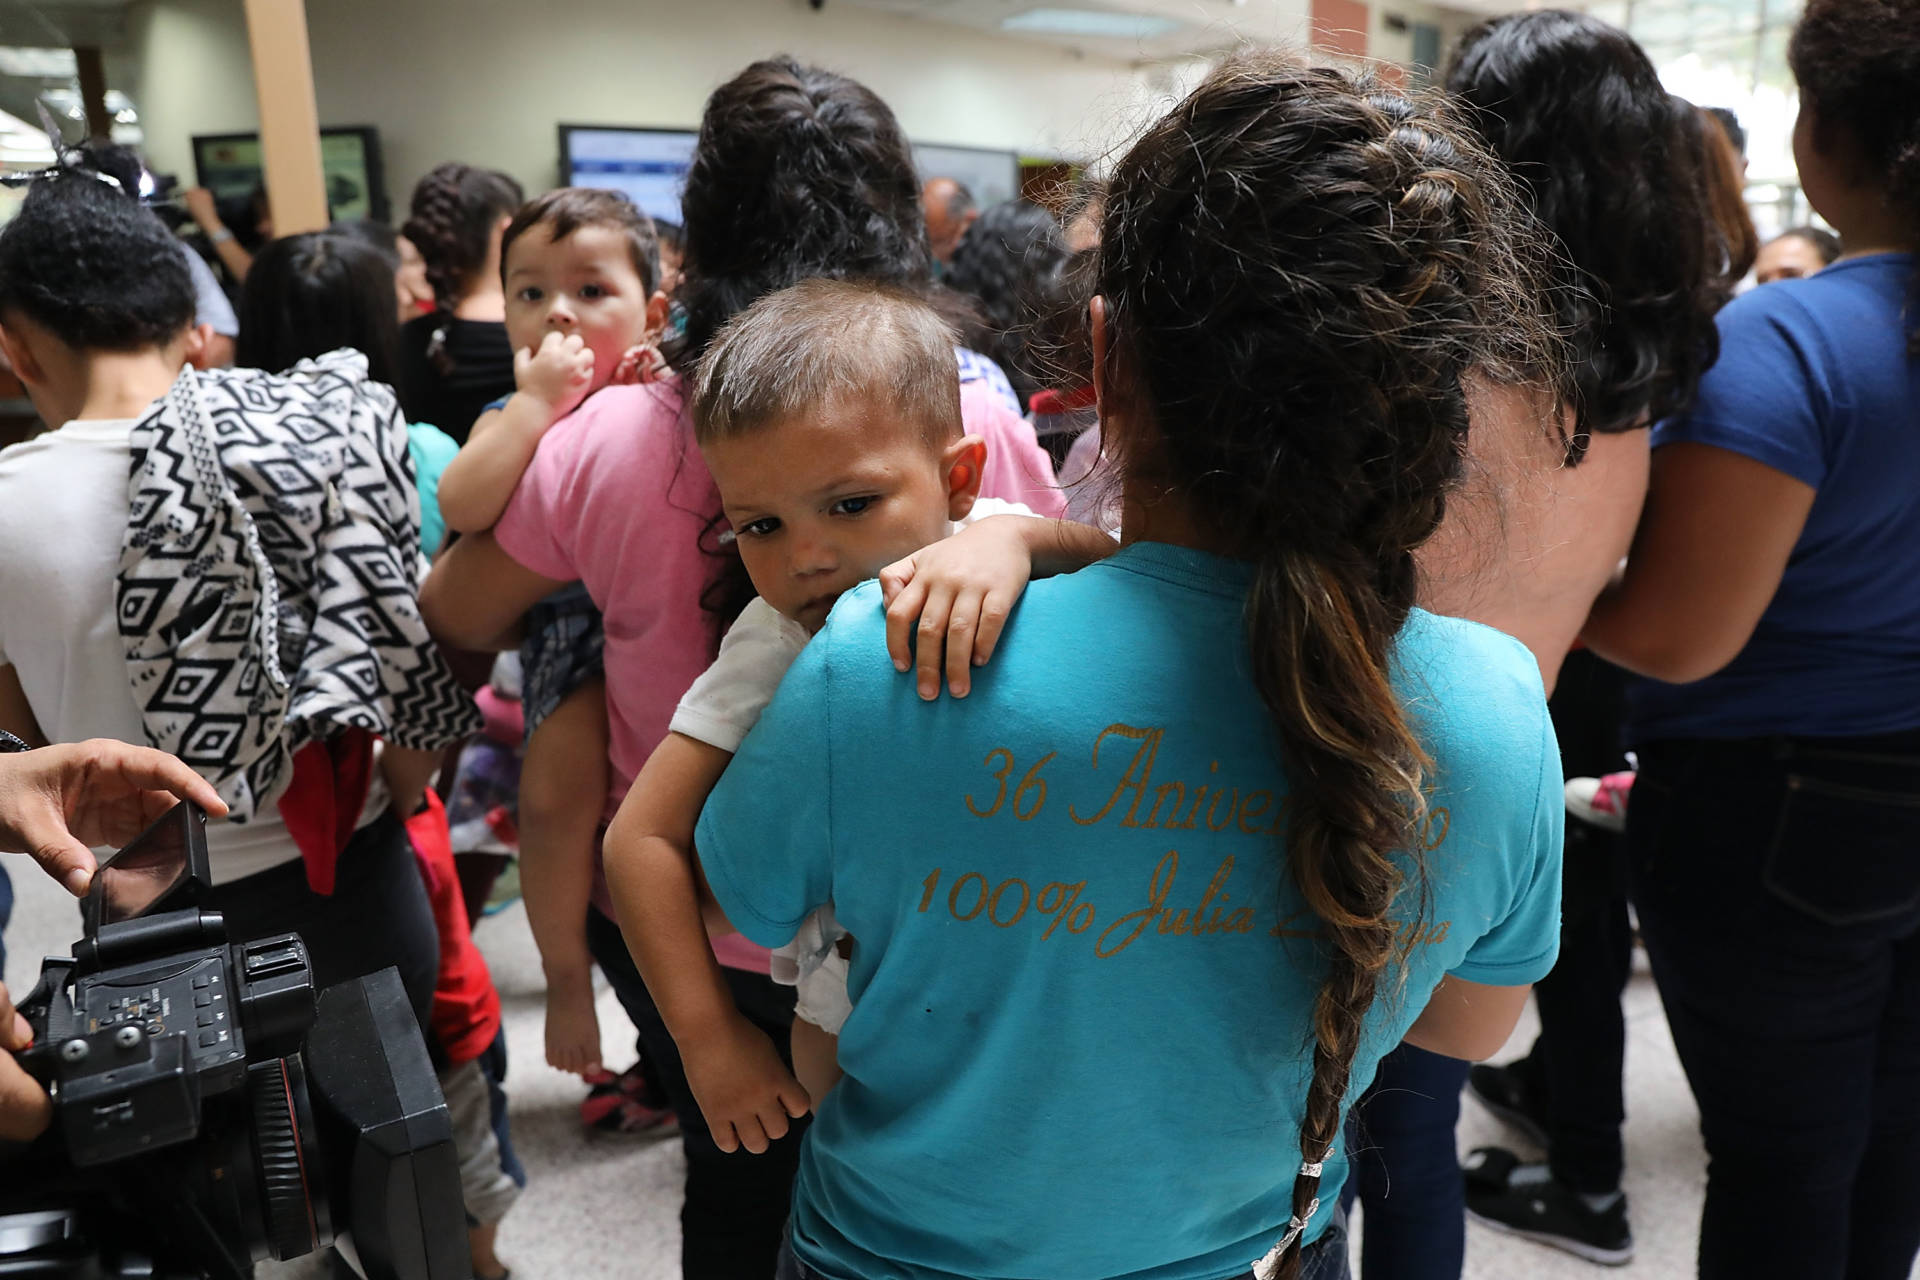 Before President Donald Trump signed an executive order halting the practice of separating families who are seeking asylum, over 2,300 immigrant children had been separated from their parents in the "zero tolerance" policy for border crossers. Spencer Platt/Getty Images